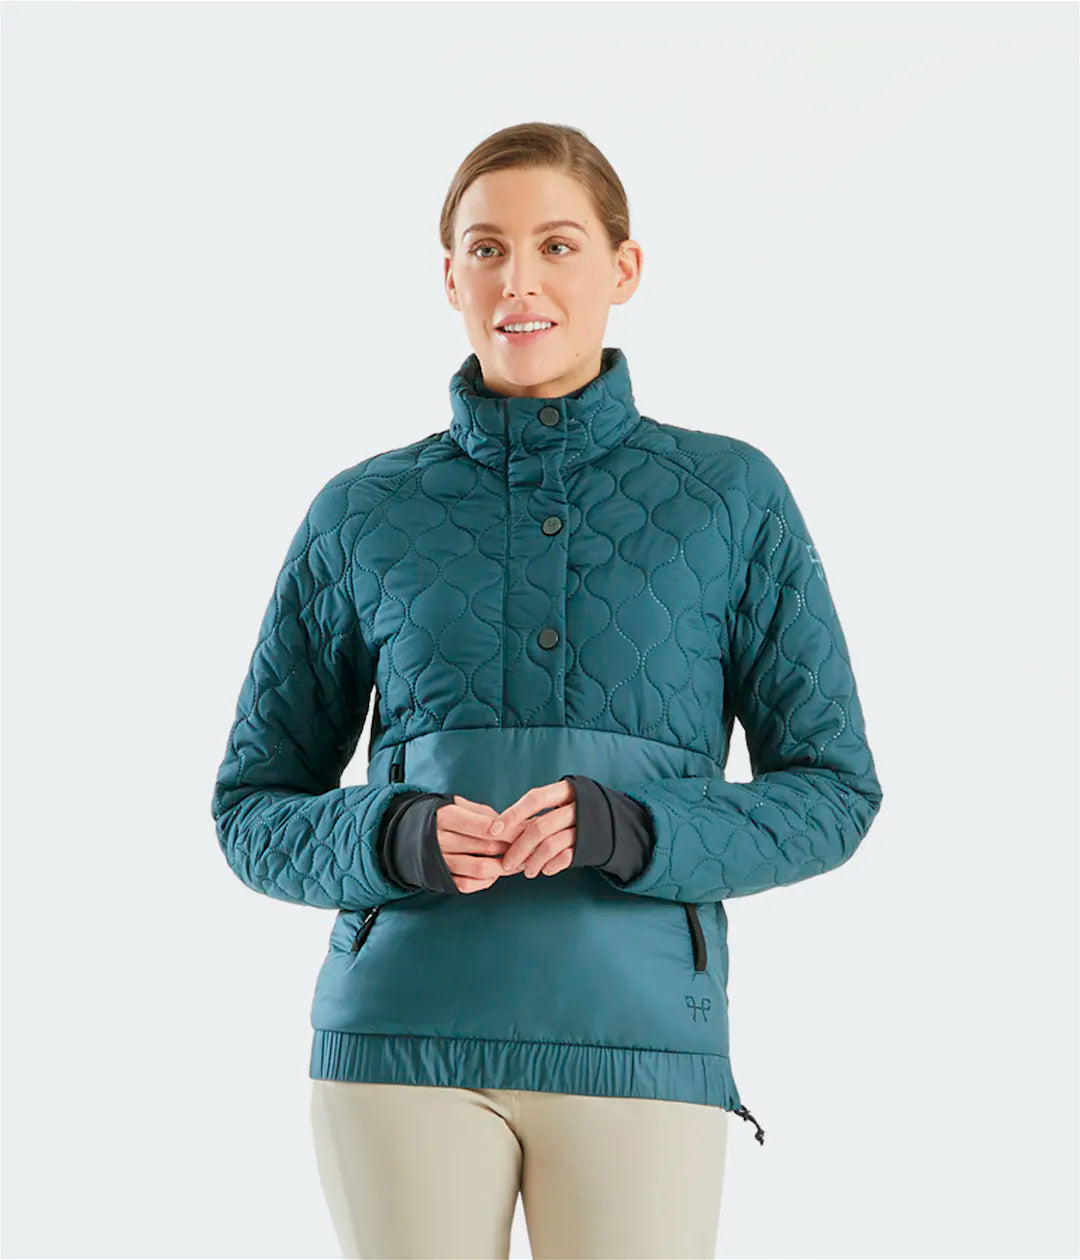 Horse Pilot Ladies' High Frequency Jacket - New!